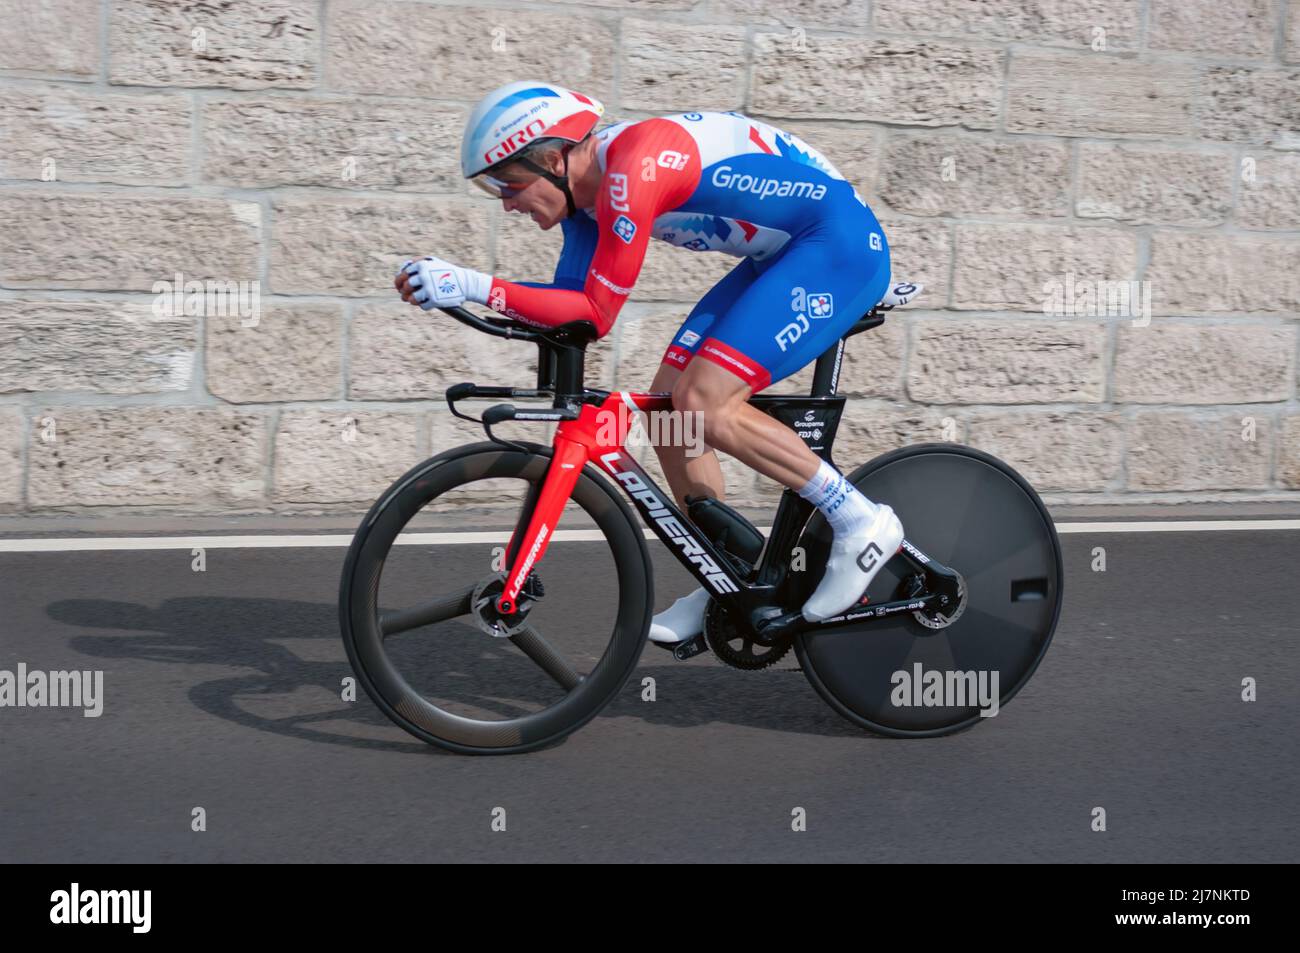 BUDAPEST, HUNGARY - MAY 07, 2022: Pro cyclist Arnaud Démare GROUPAMA - FDJ Giro D'Italia Stage 2 Time trial - cycling competition on May 07, 2022 in B Stock Photo